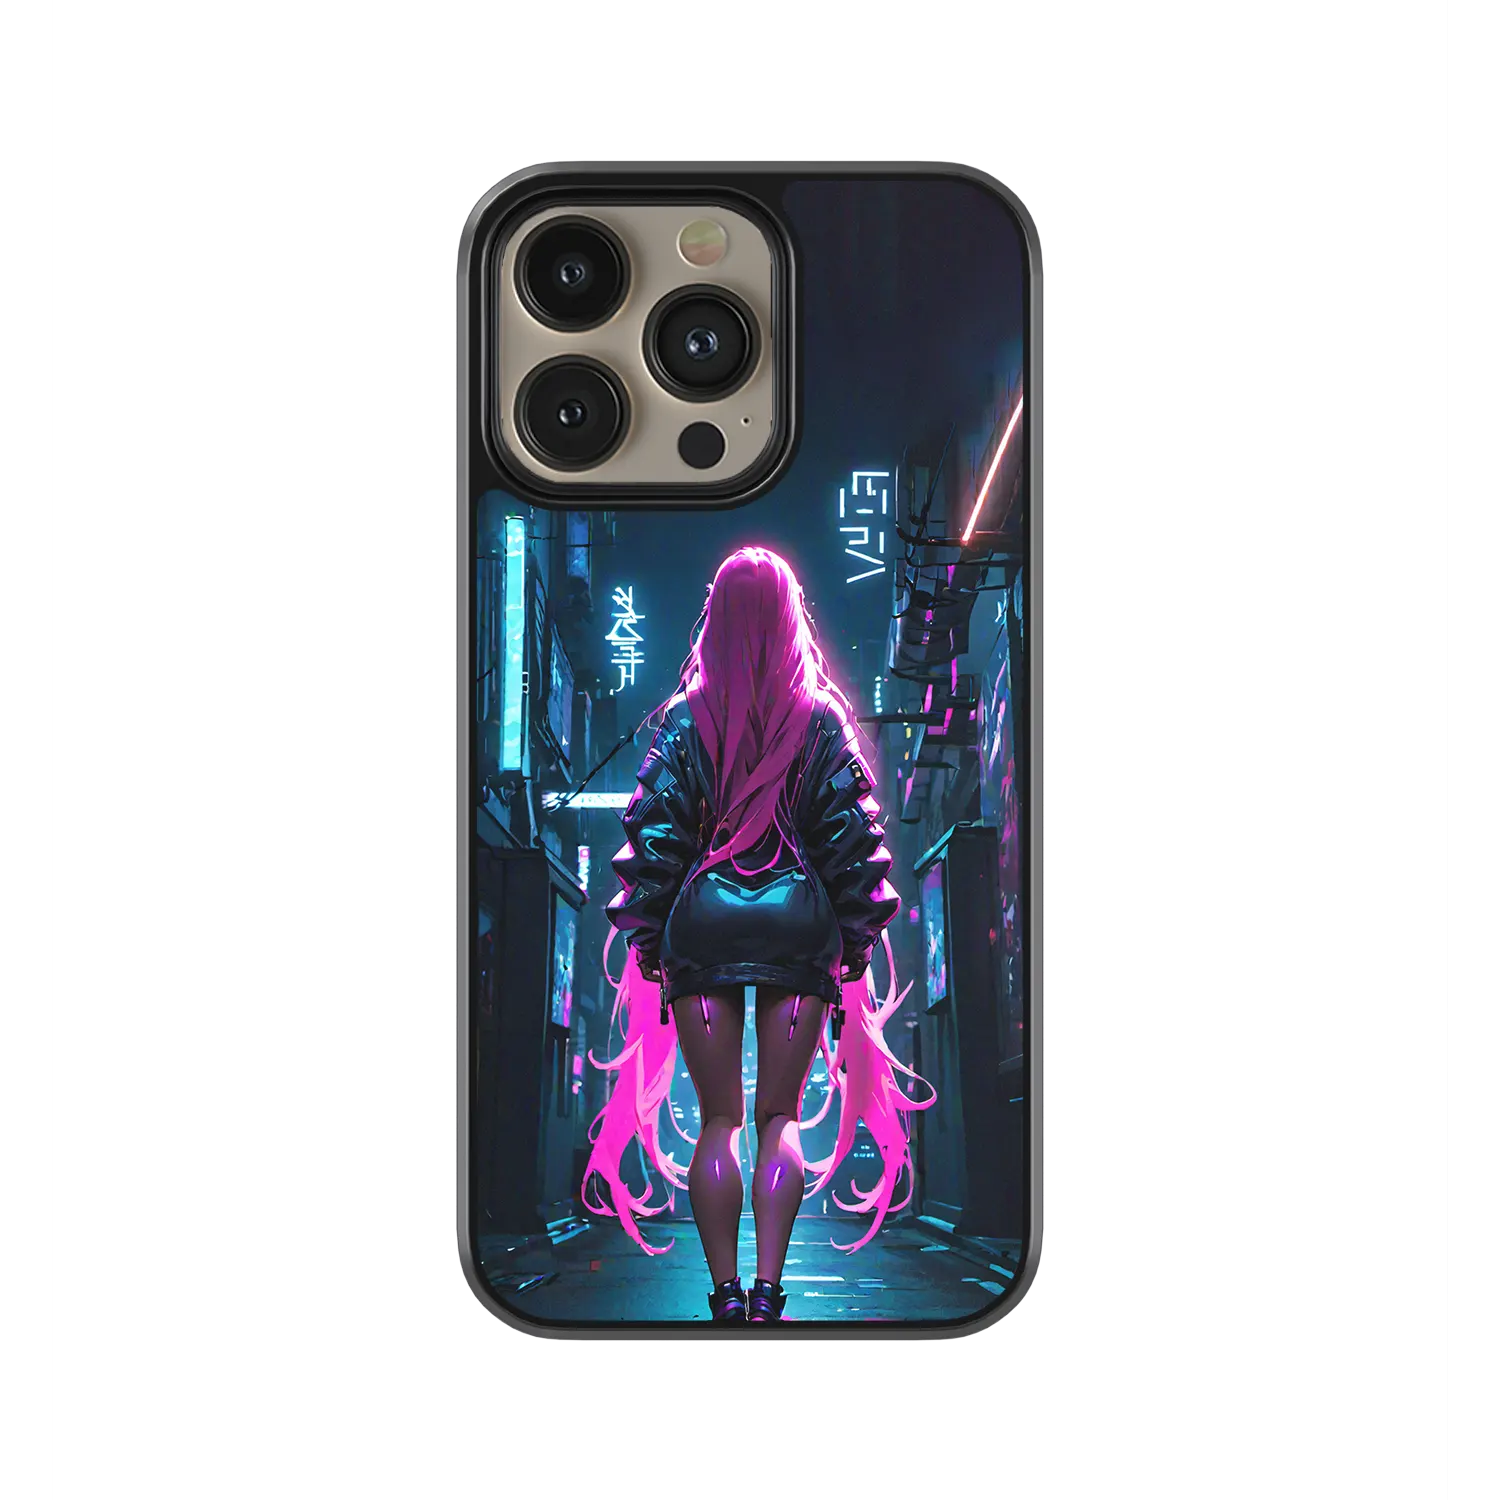 Tokyo Nights iphone 12 pro Max cover